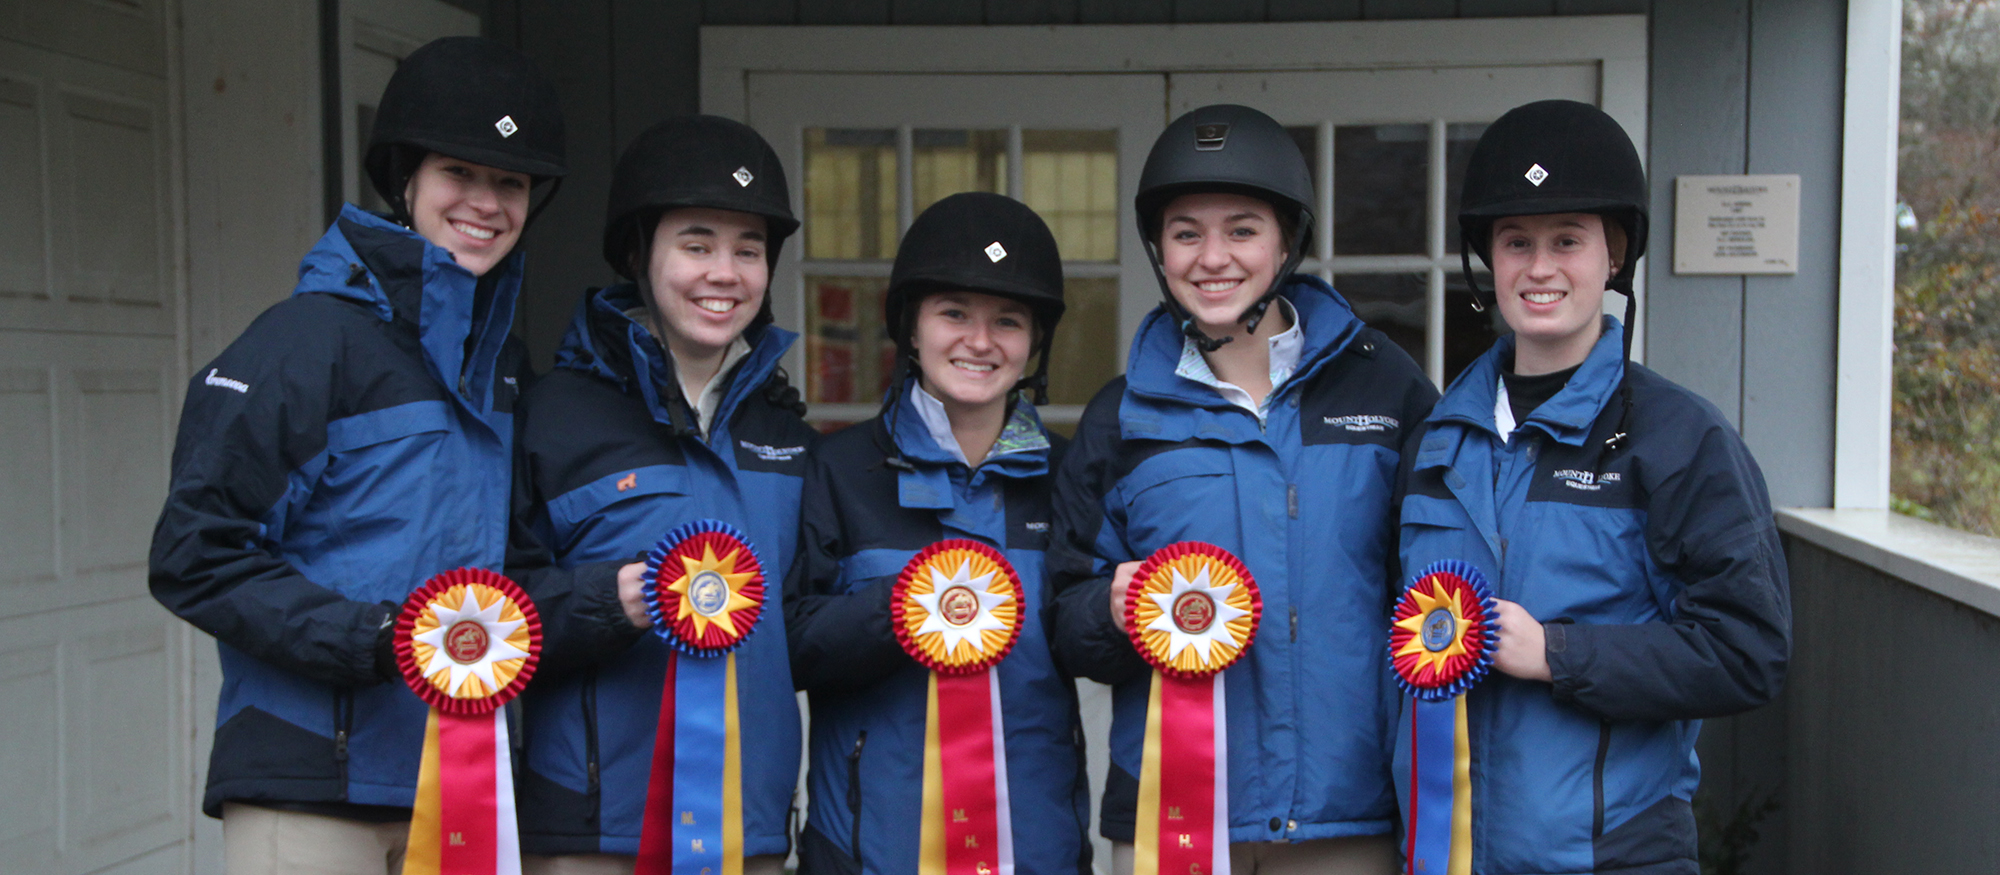 Photo featuring Riding award winners from November 18th's home riding show. Left to right are Franny Eremeeva, Taryn Isenburg, Emma Recchi, Cat Lamond and Harriet Thomson.